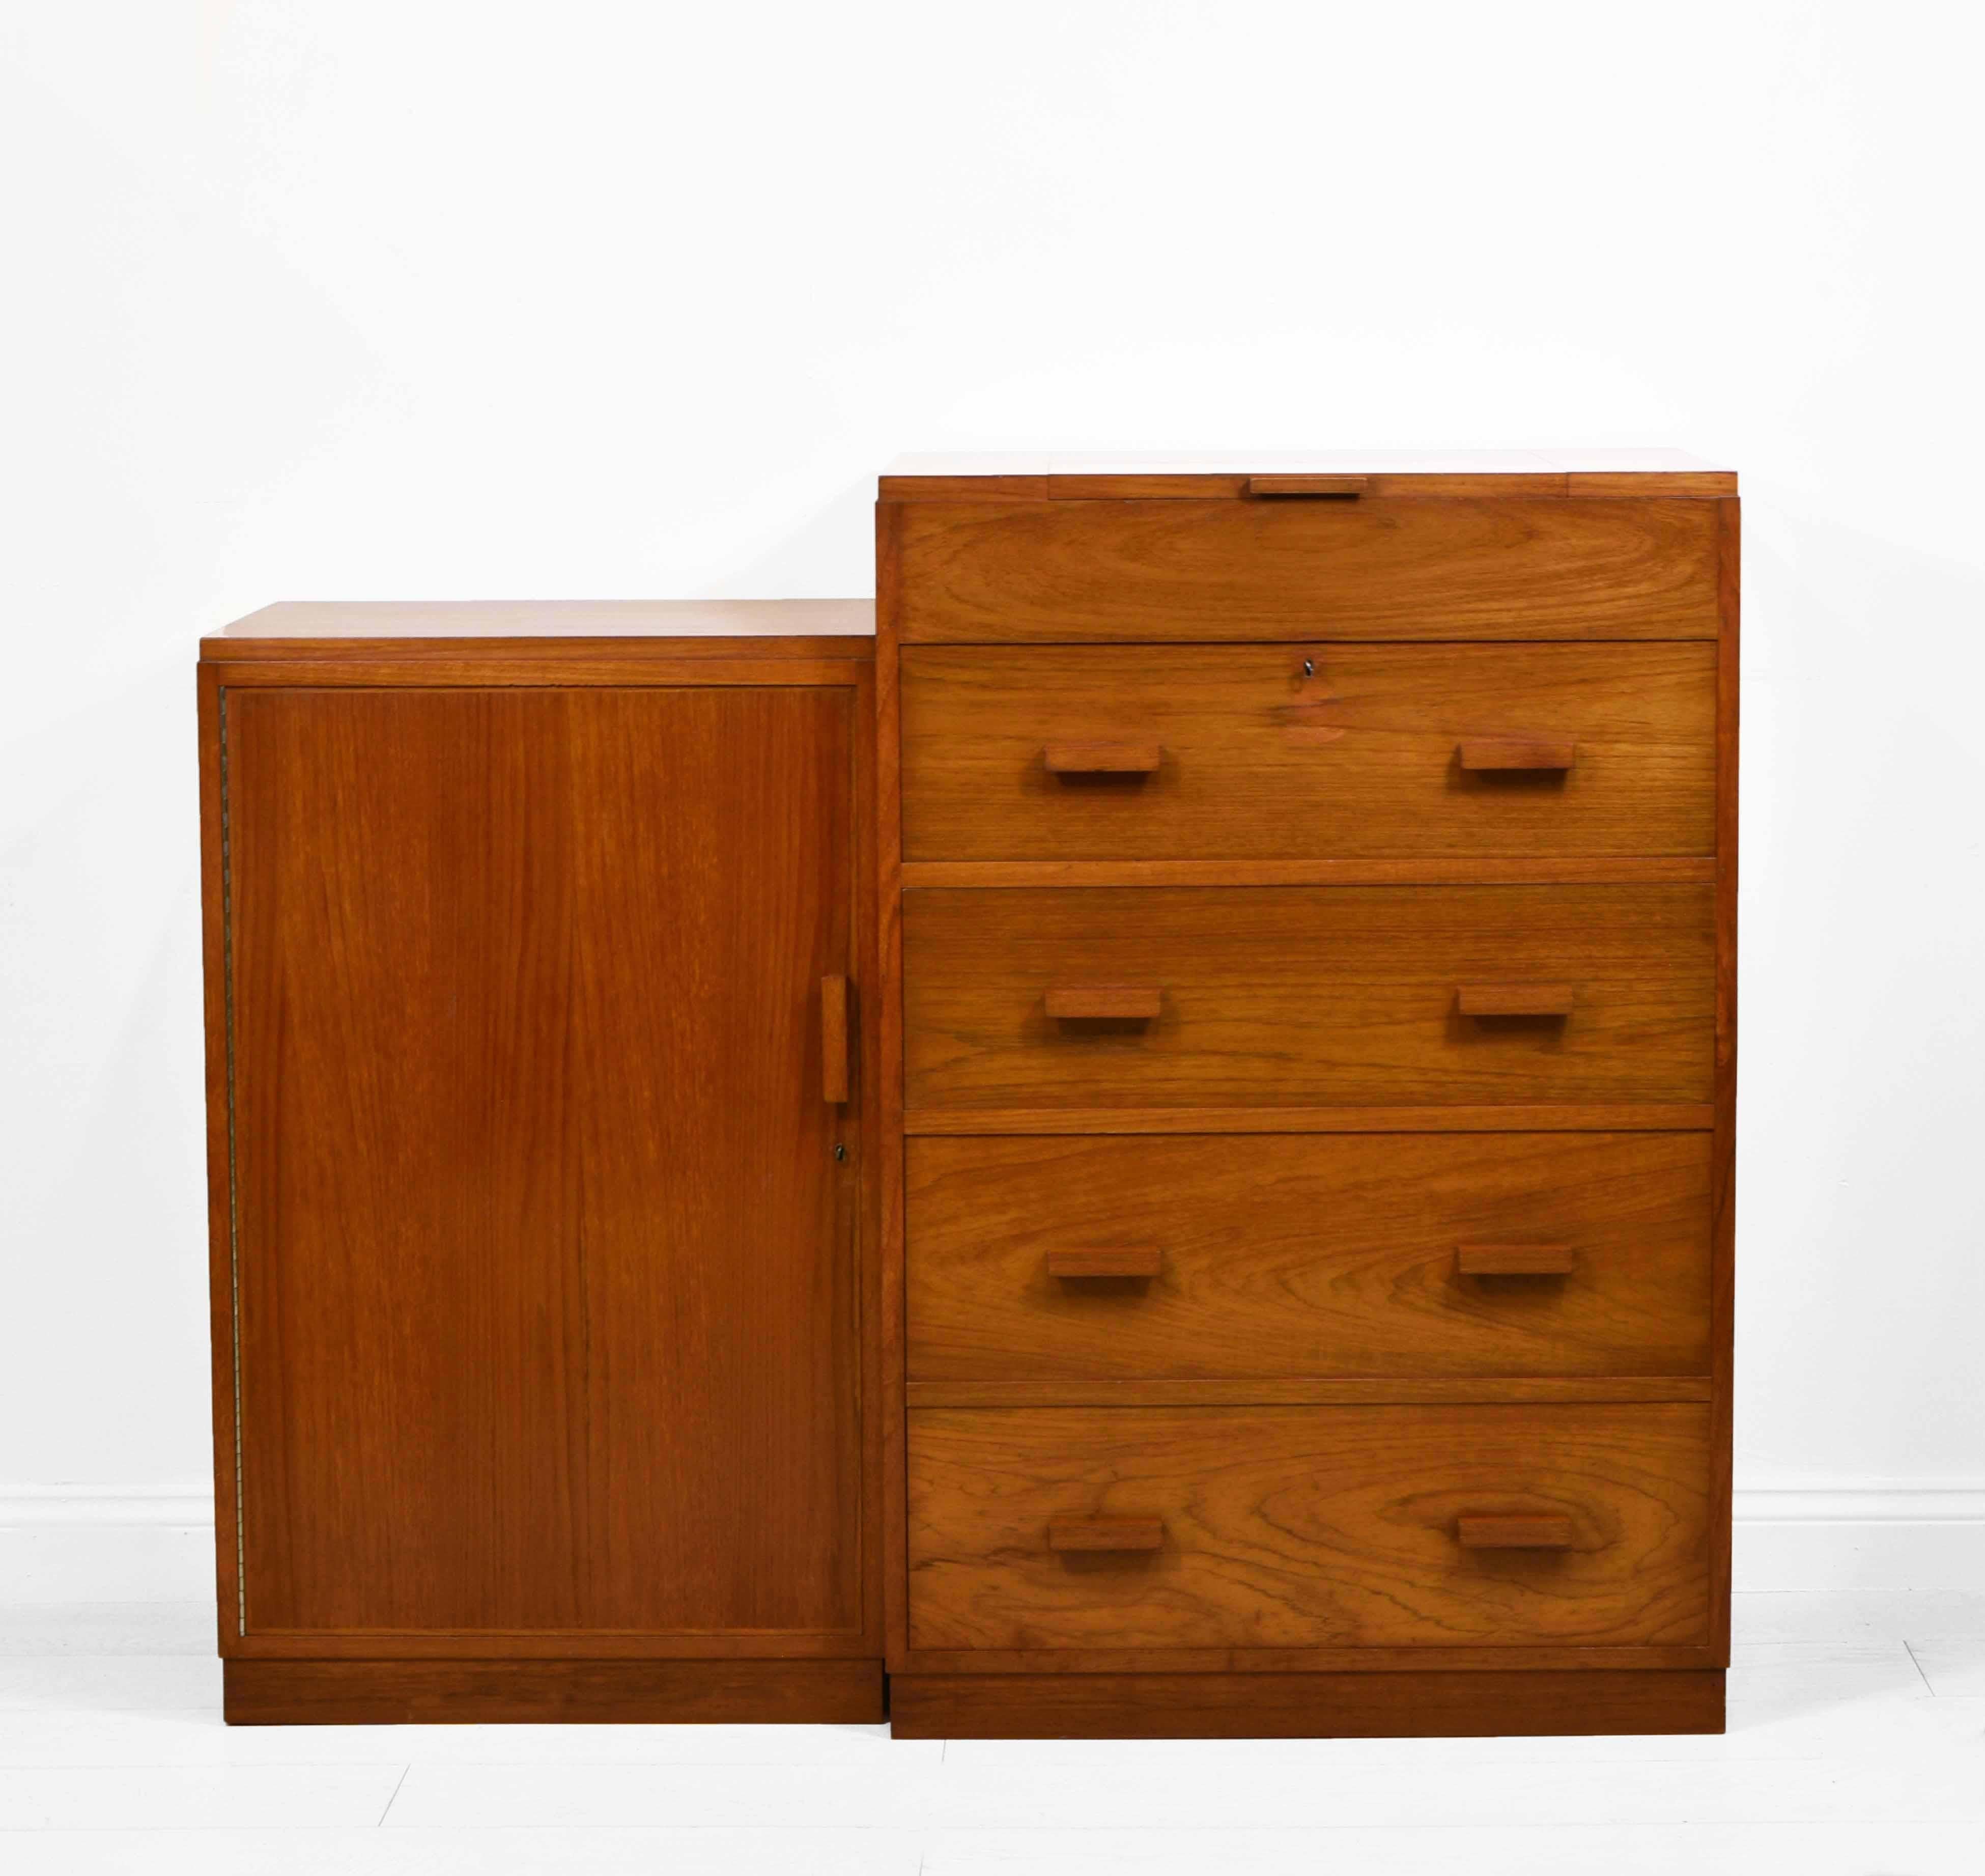 An Anglo Indian camphor wood step form compactum from the Art Deco period. Circa 1930.

A very well made compactum, showing superb colour and figuring in the grain. It has the original finish, with a nice shine. There are some marks and knocks